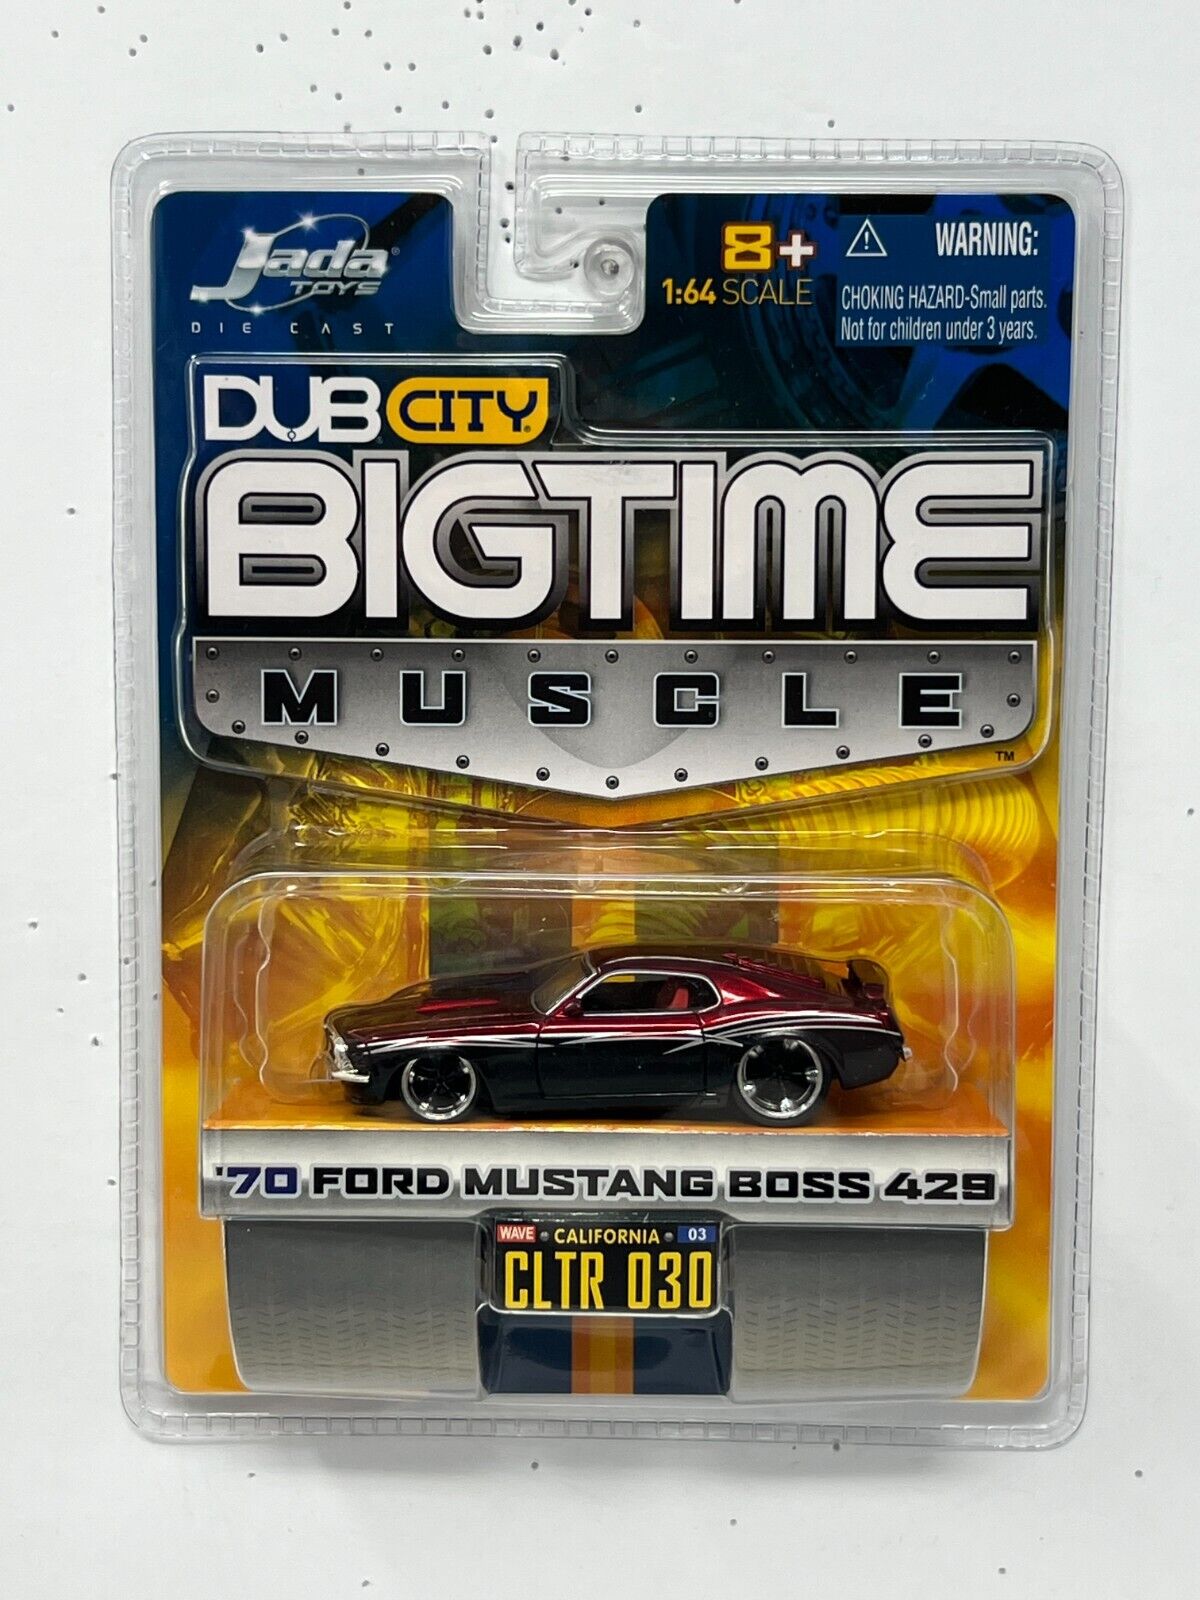 Jada Dub City Bigtime Muscle 1970 Ford Mustang Boss 429 1:64 Diecast Red Black